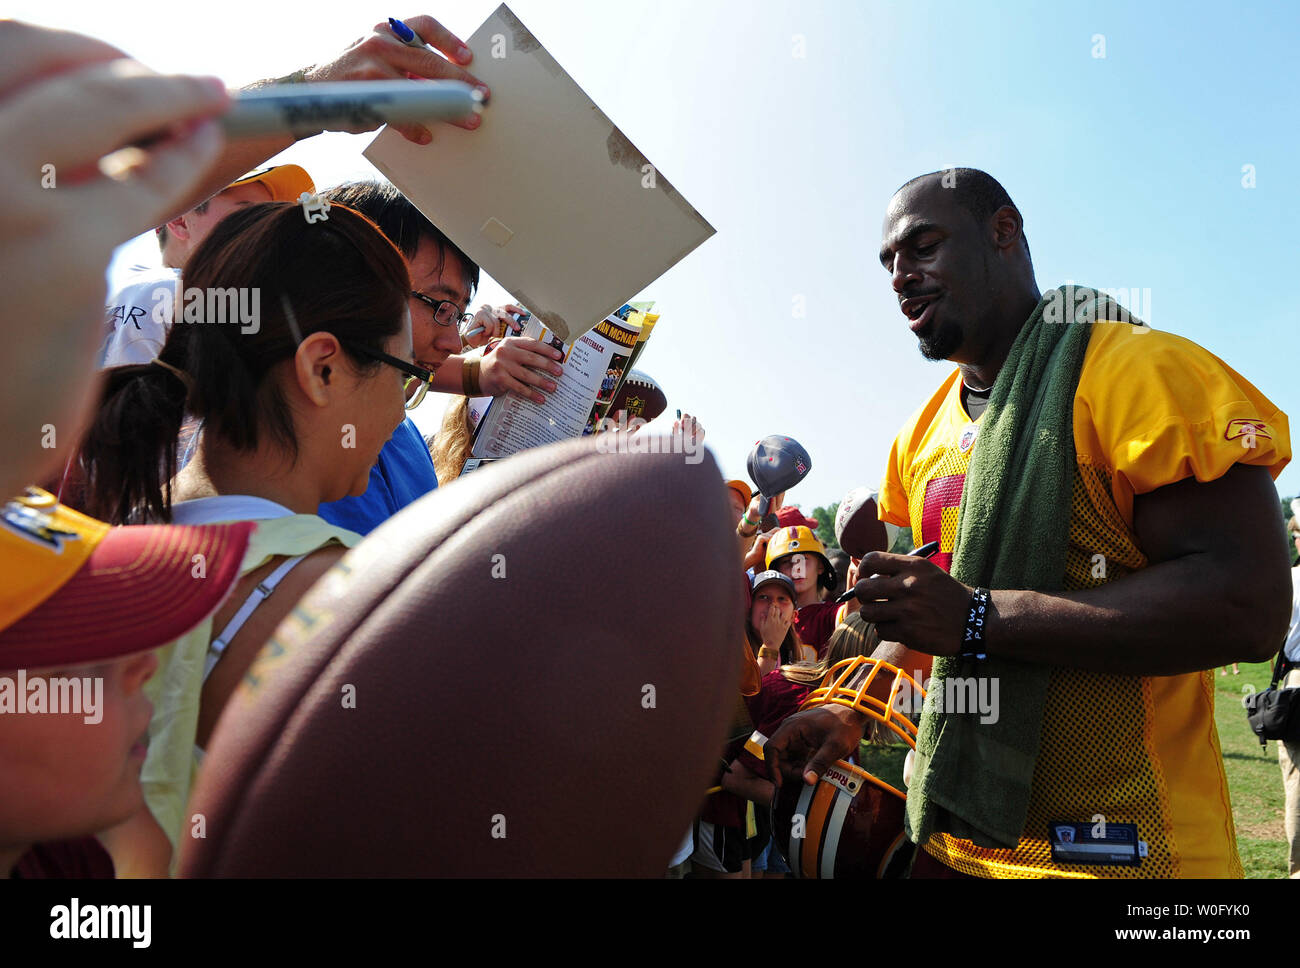 Washington Redskins quarterback Donovan McNabb signs autographs after the Redskins last day of training camp at Redskins Park in Ashburn, Virginia, August 19, 2010. UPI/Kevin Dietsch Stock Photo